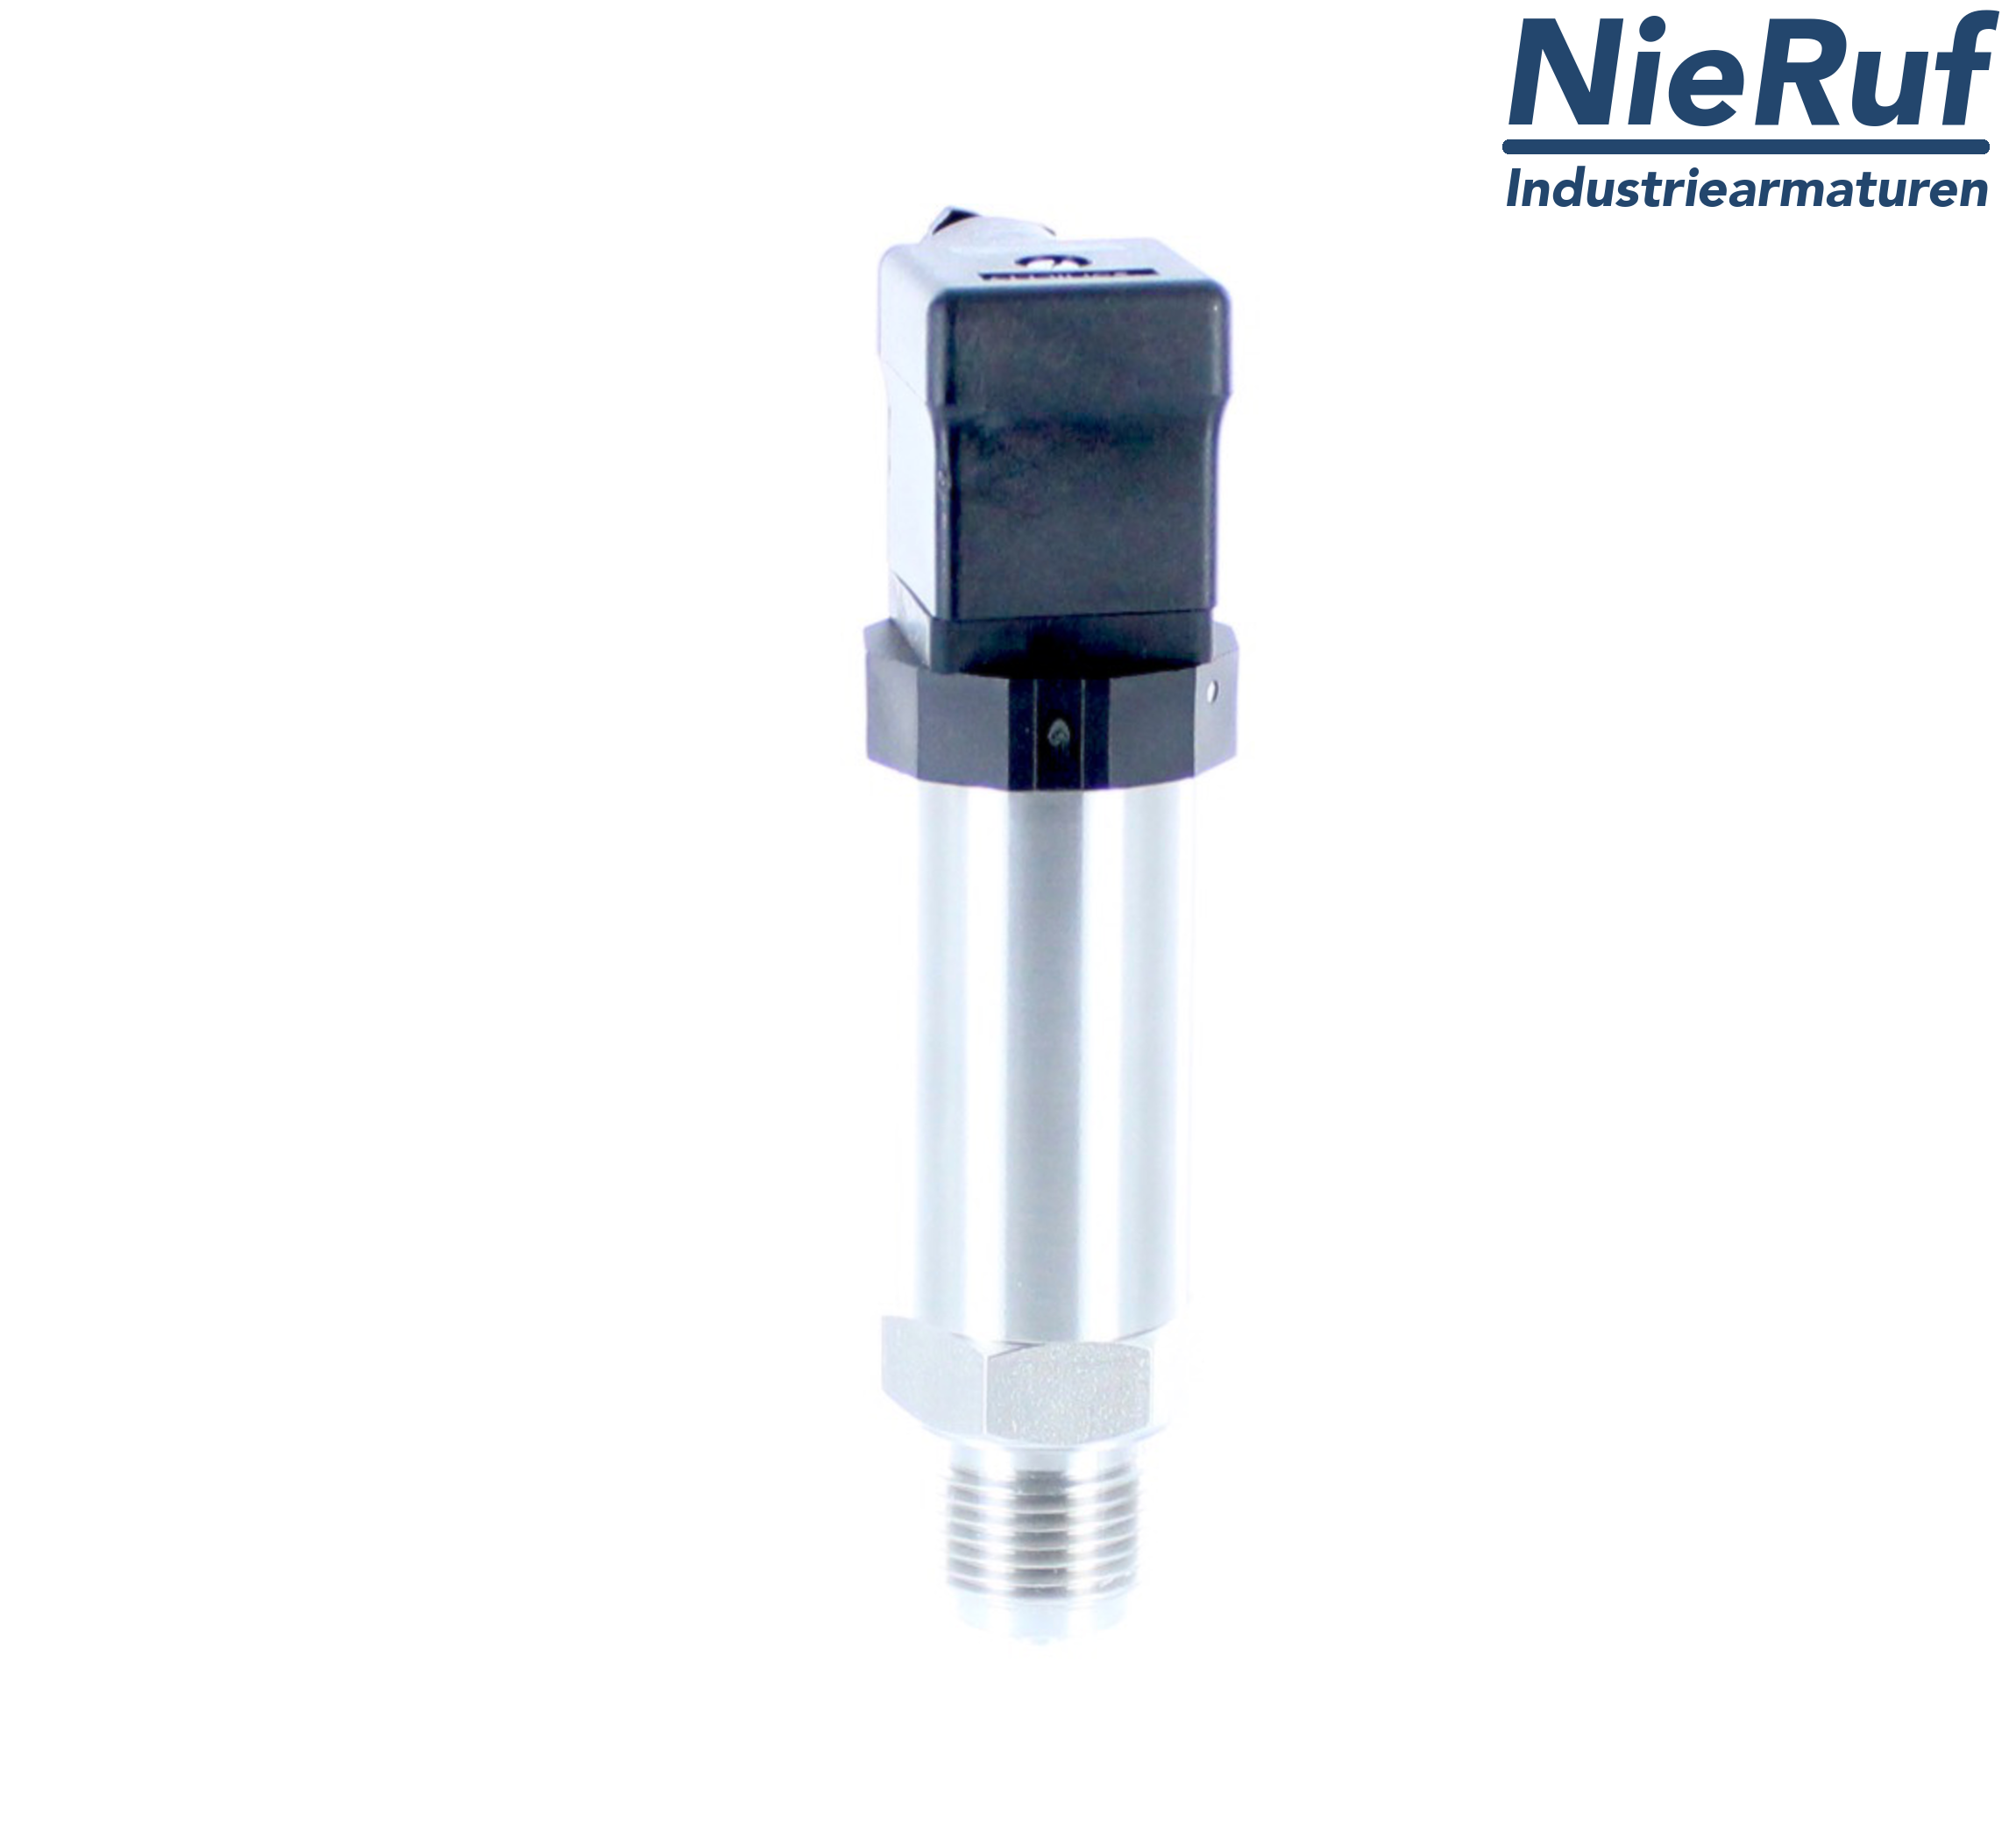 pressure sensor G 1/2" B DS01 stainless steel 2-wire: 4-20mA FPM 0,0 - 600,0 bar